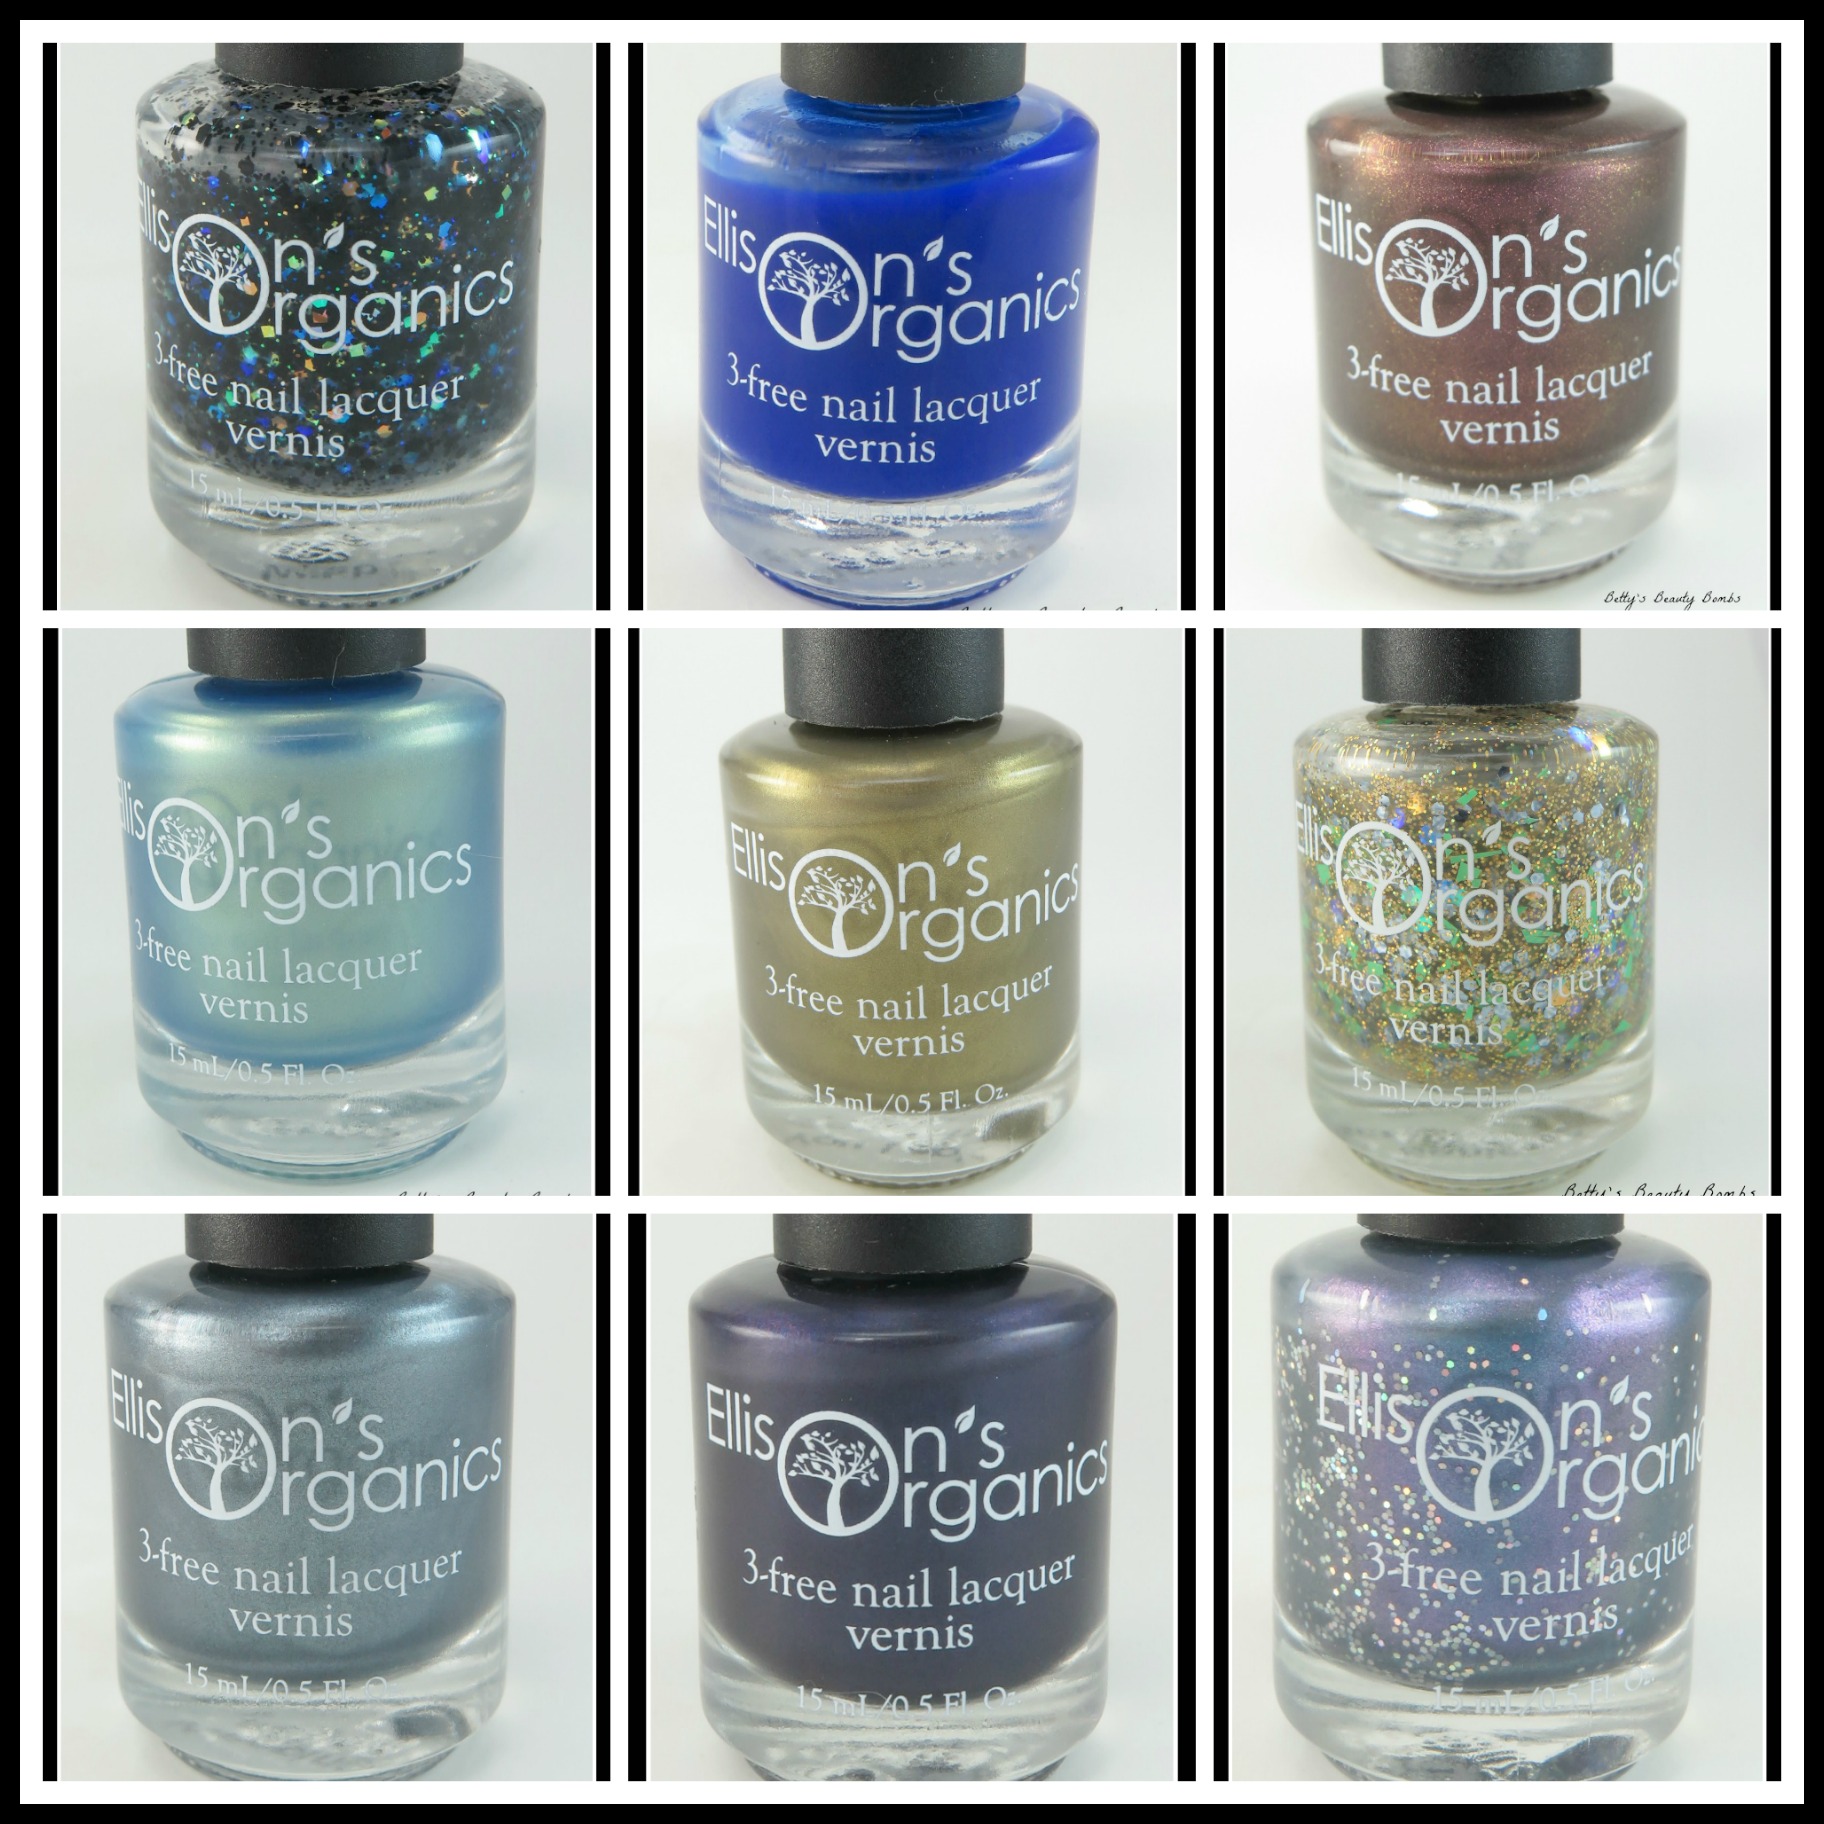 The Doctor Who Collection of Three-Free, Vegan Nail Polishes